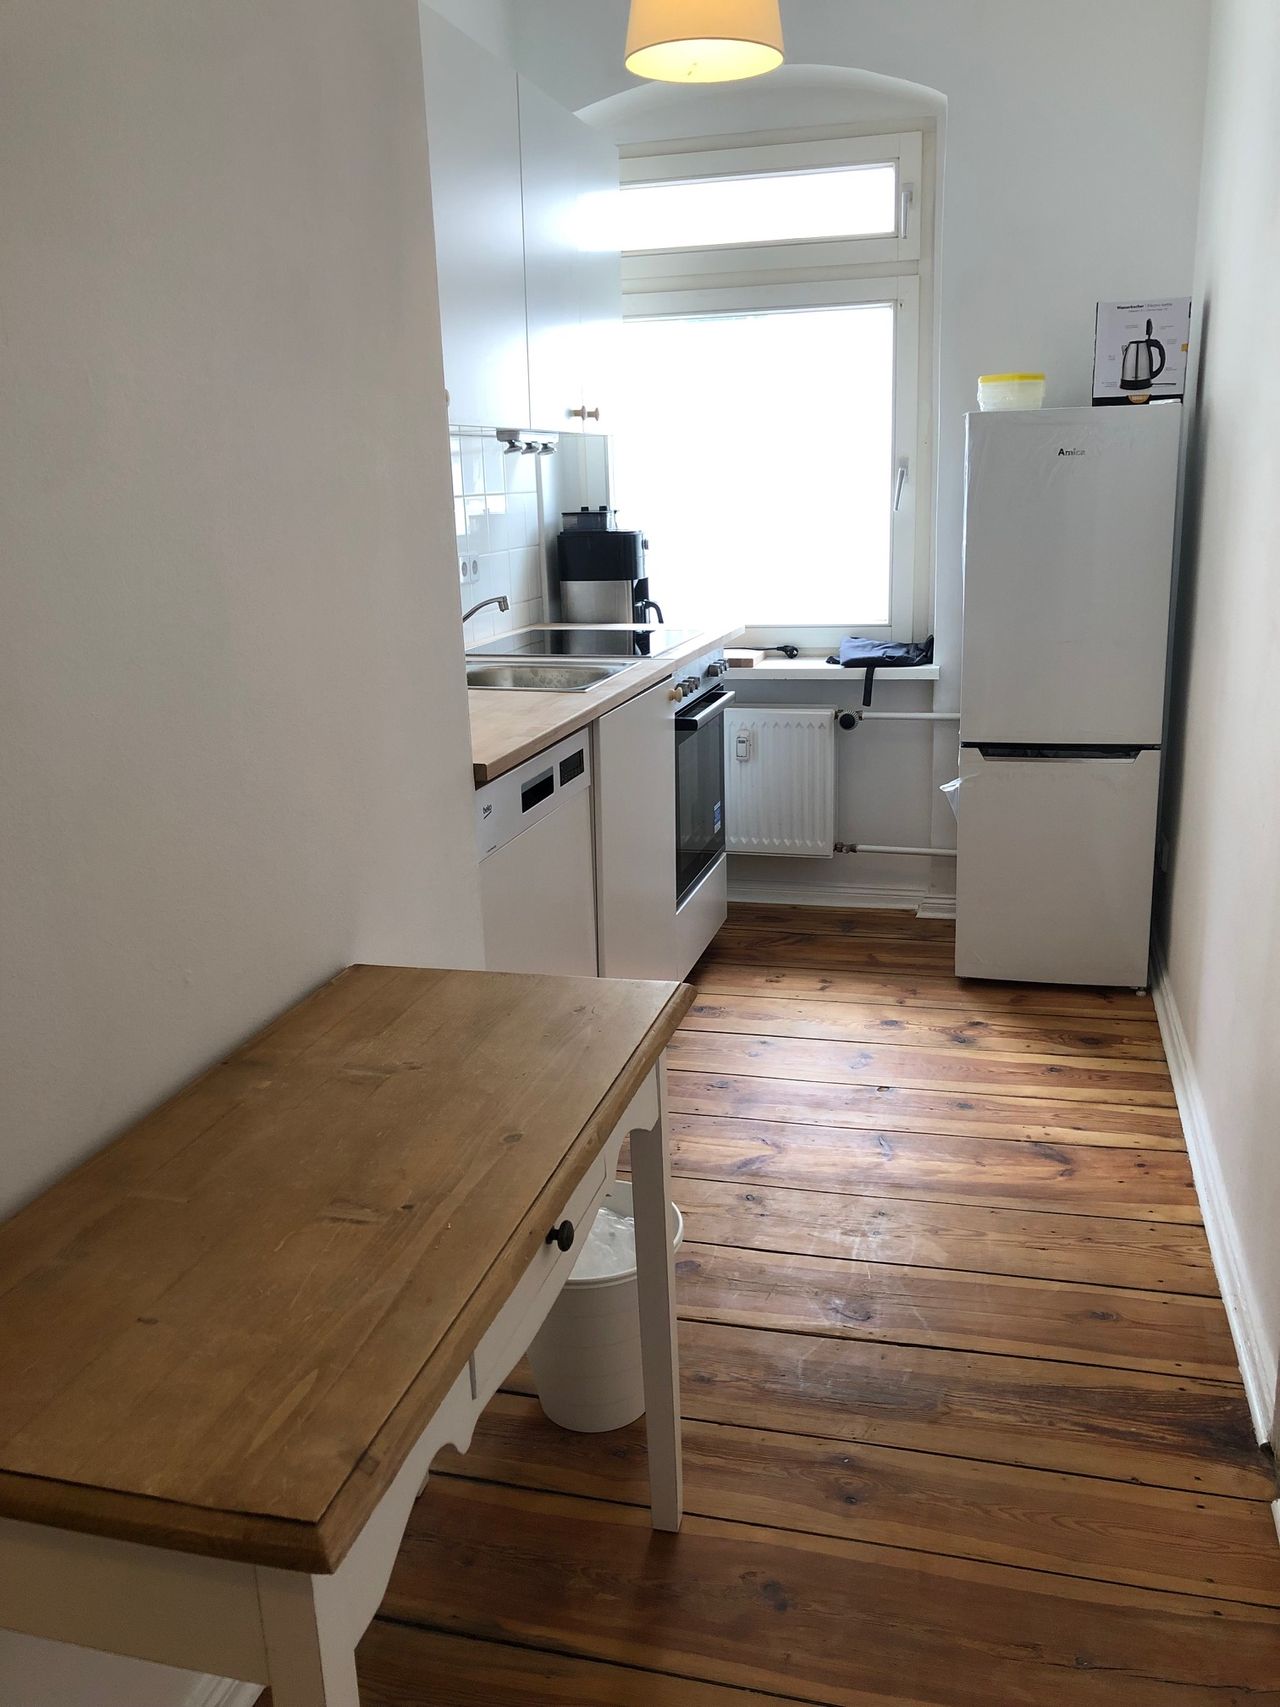 Very nice 1 room apartment in the heart of Friedrichshain- only 8 min to Alexanderplatz